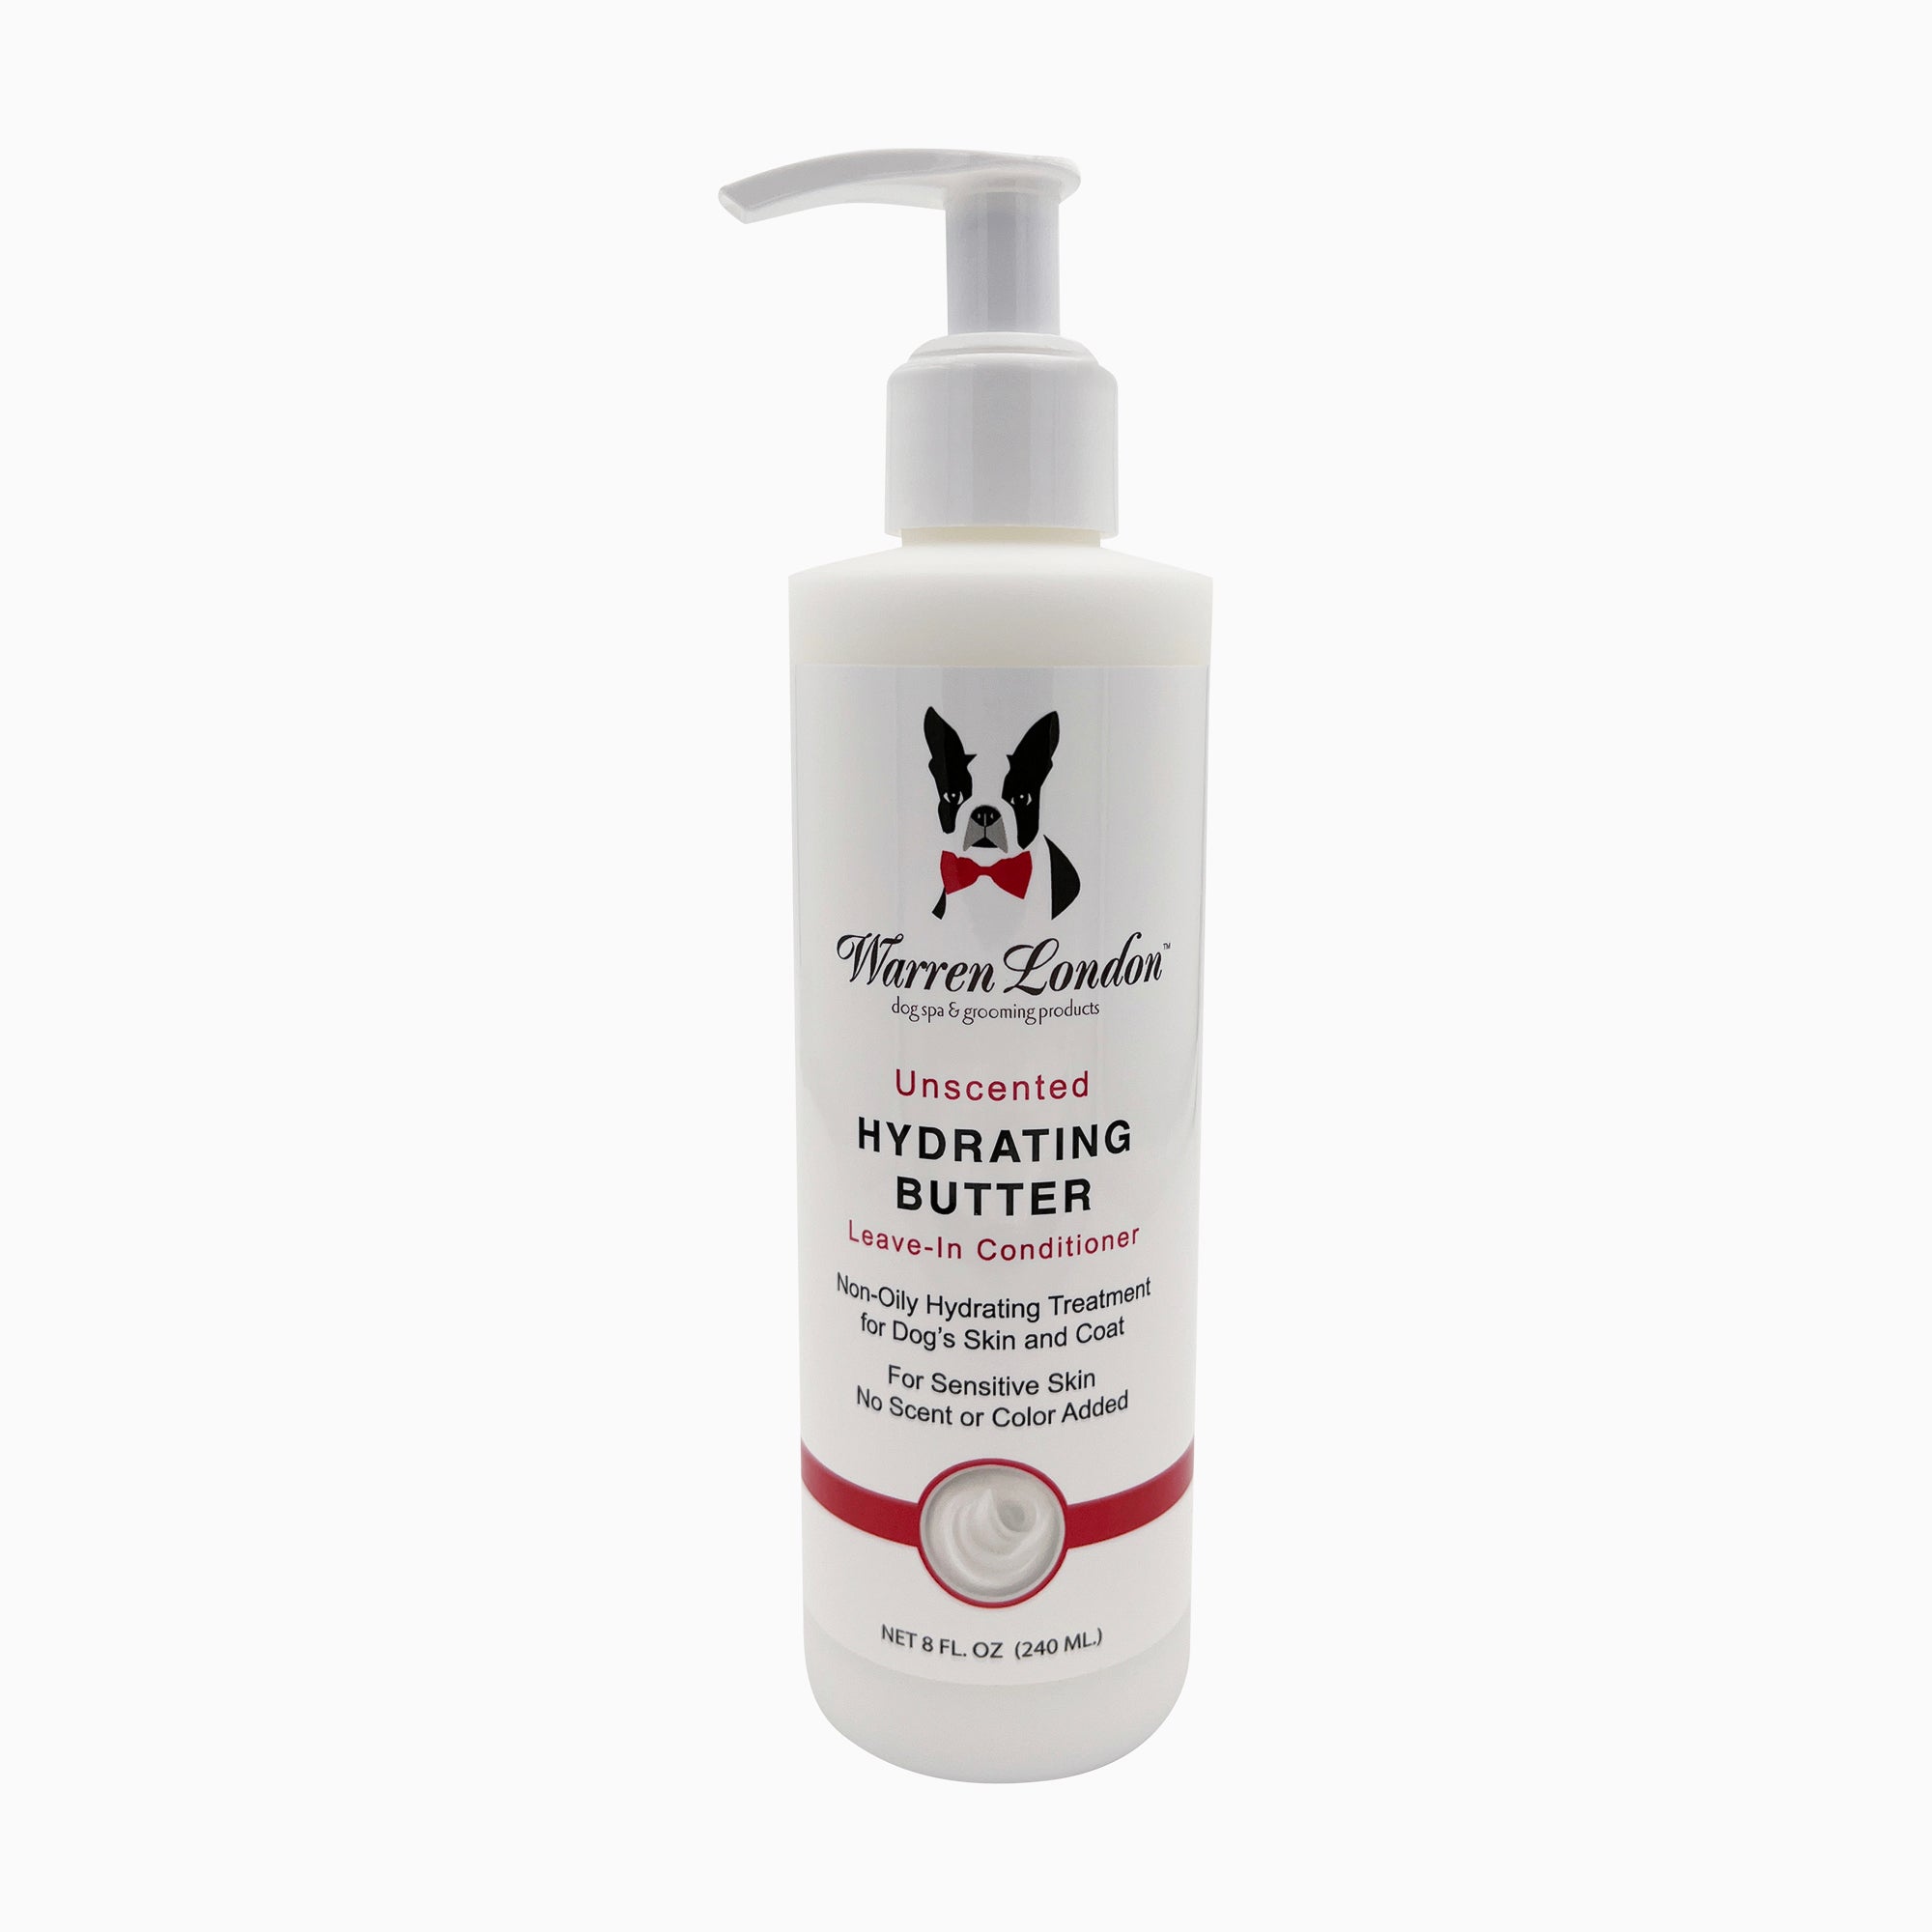 Hydrating Butter - For Dog's Skin & Coat - Leave-In Moisturizer Spa Product Warren London Unscented 